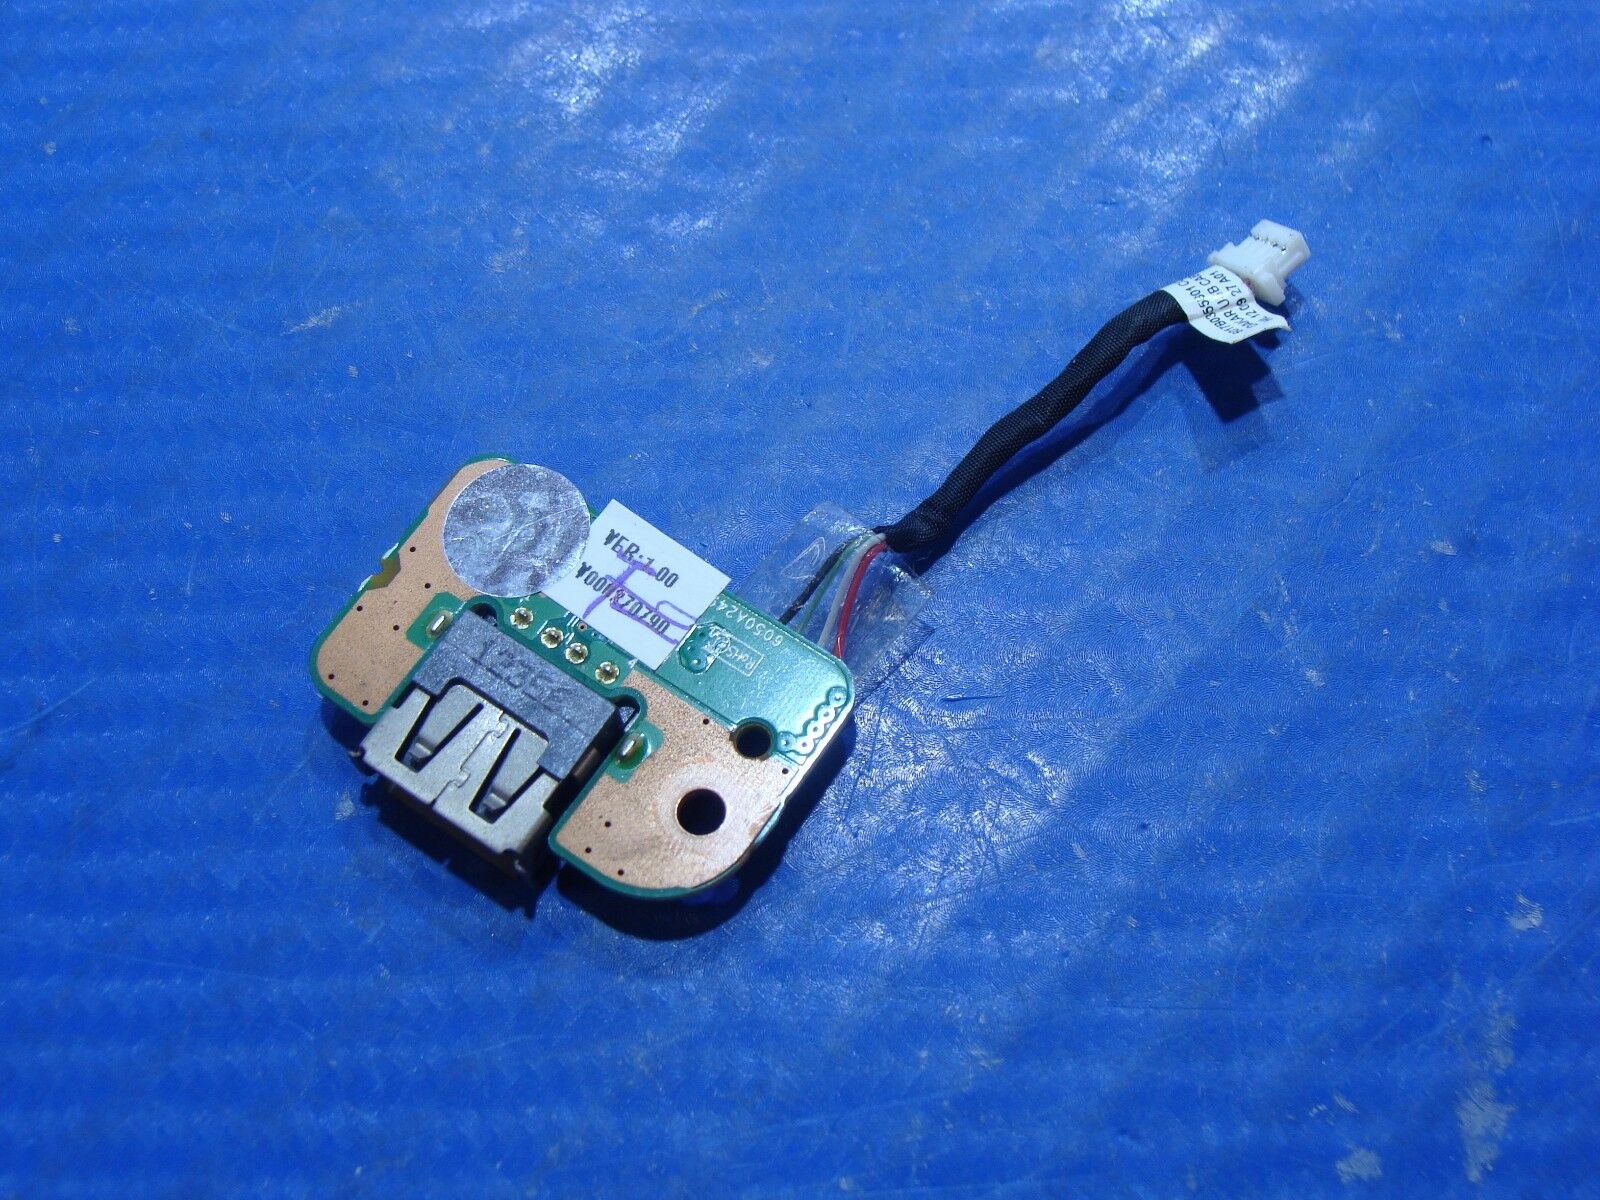 Toshiba Satellite C855D-S5303 15.6" Genuine USB Port Board with Cable V000270790 Apple